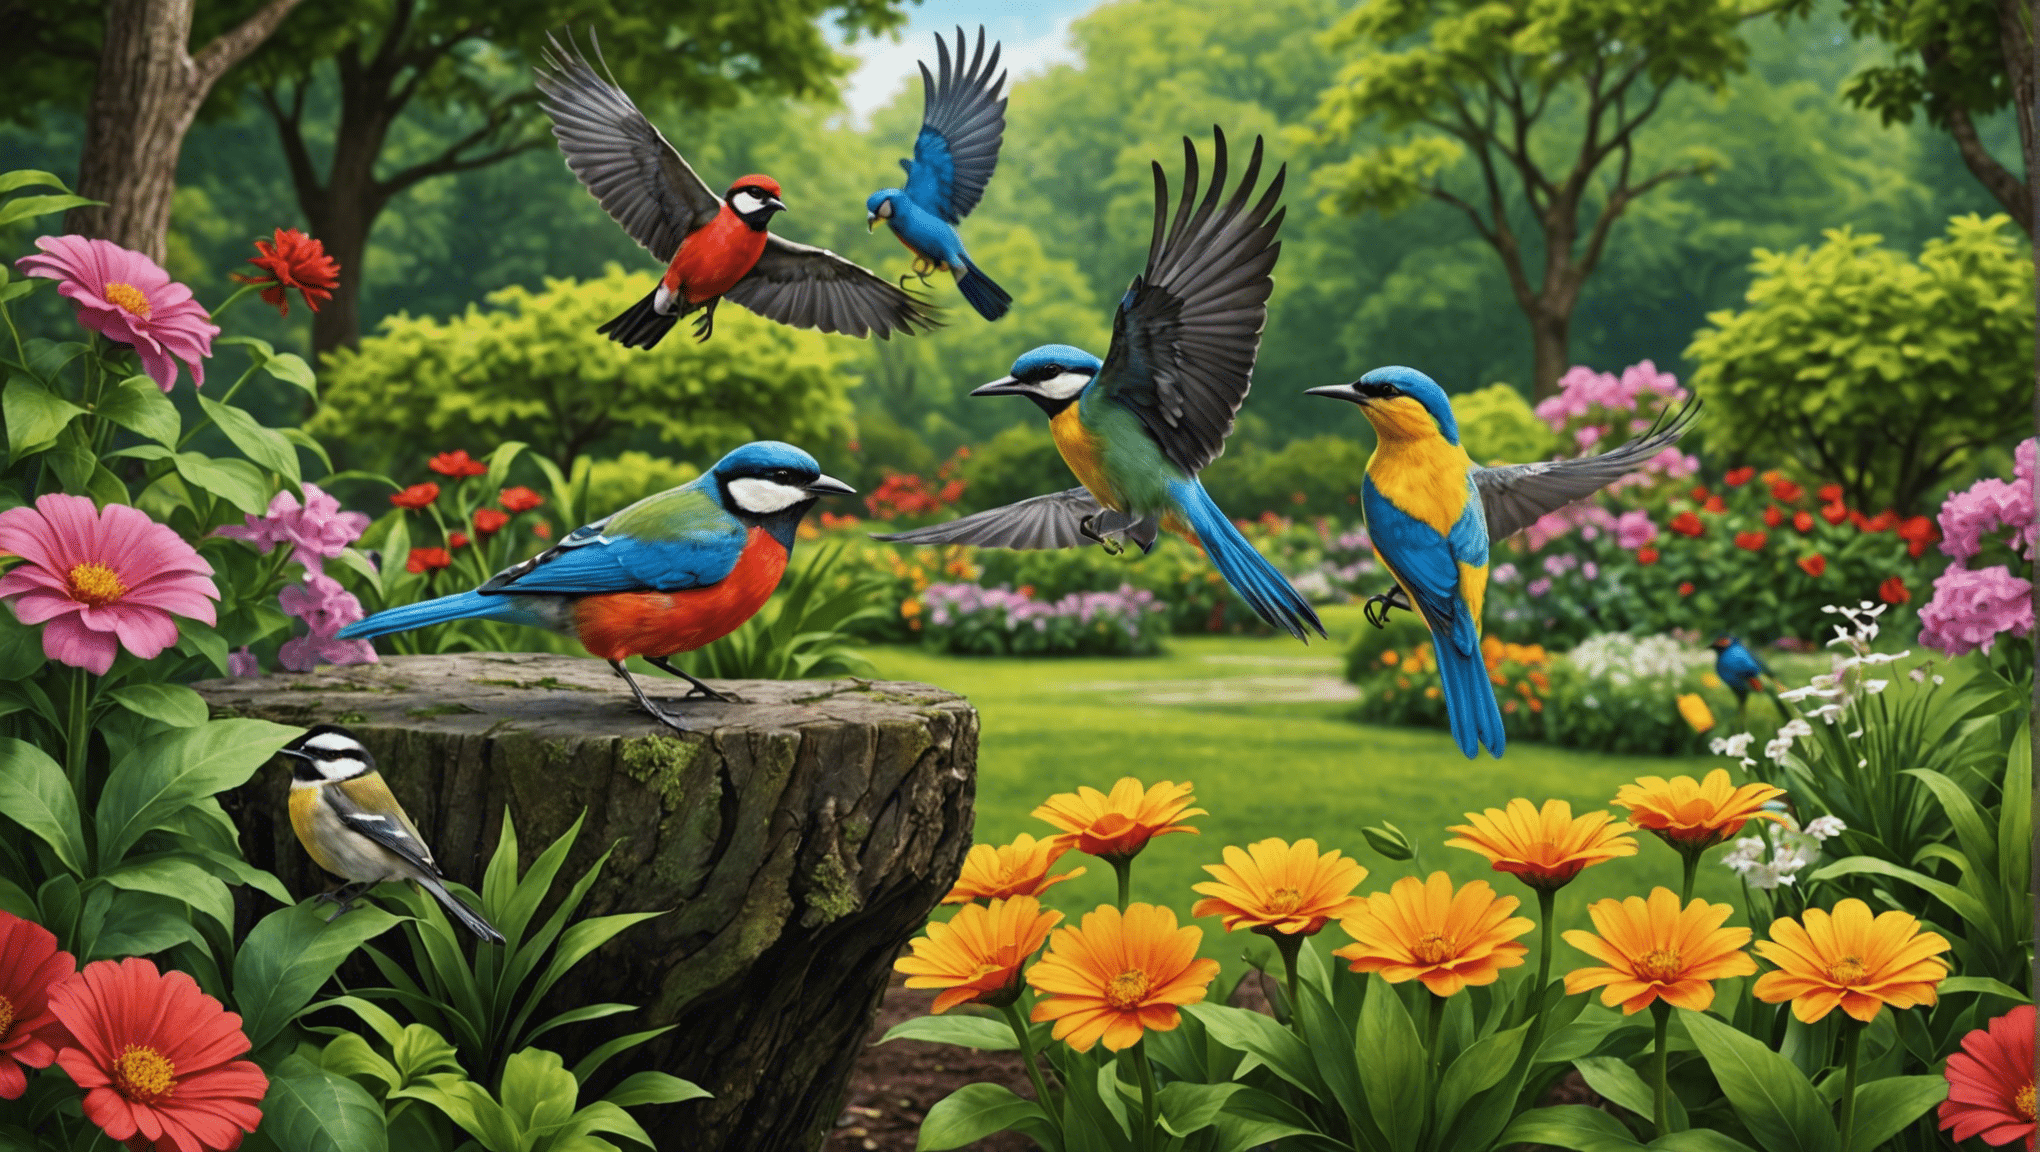 discover the ideal birdseed for attracting a variety of wild birds to your garden with our comprehensive guide. find out the best types of bird seed to create a bird-friendly environment and enjoy the beauty of nature in your backyard.